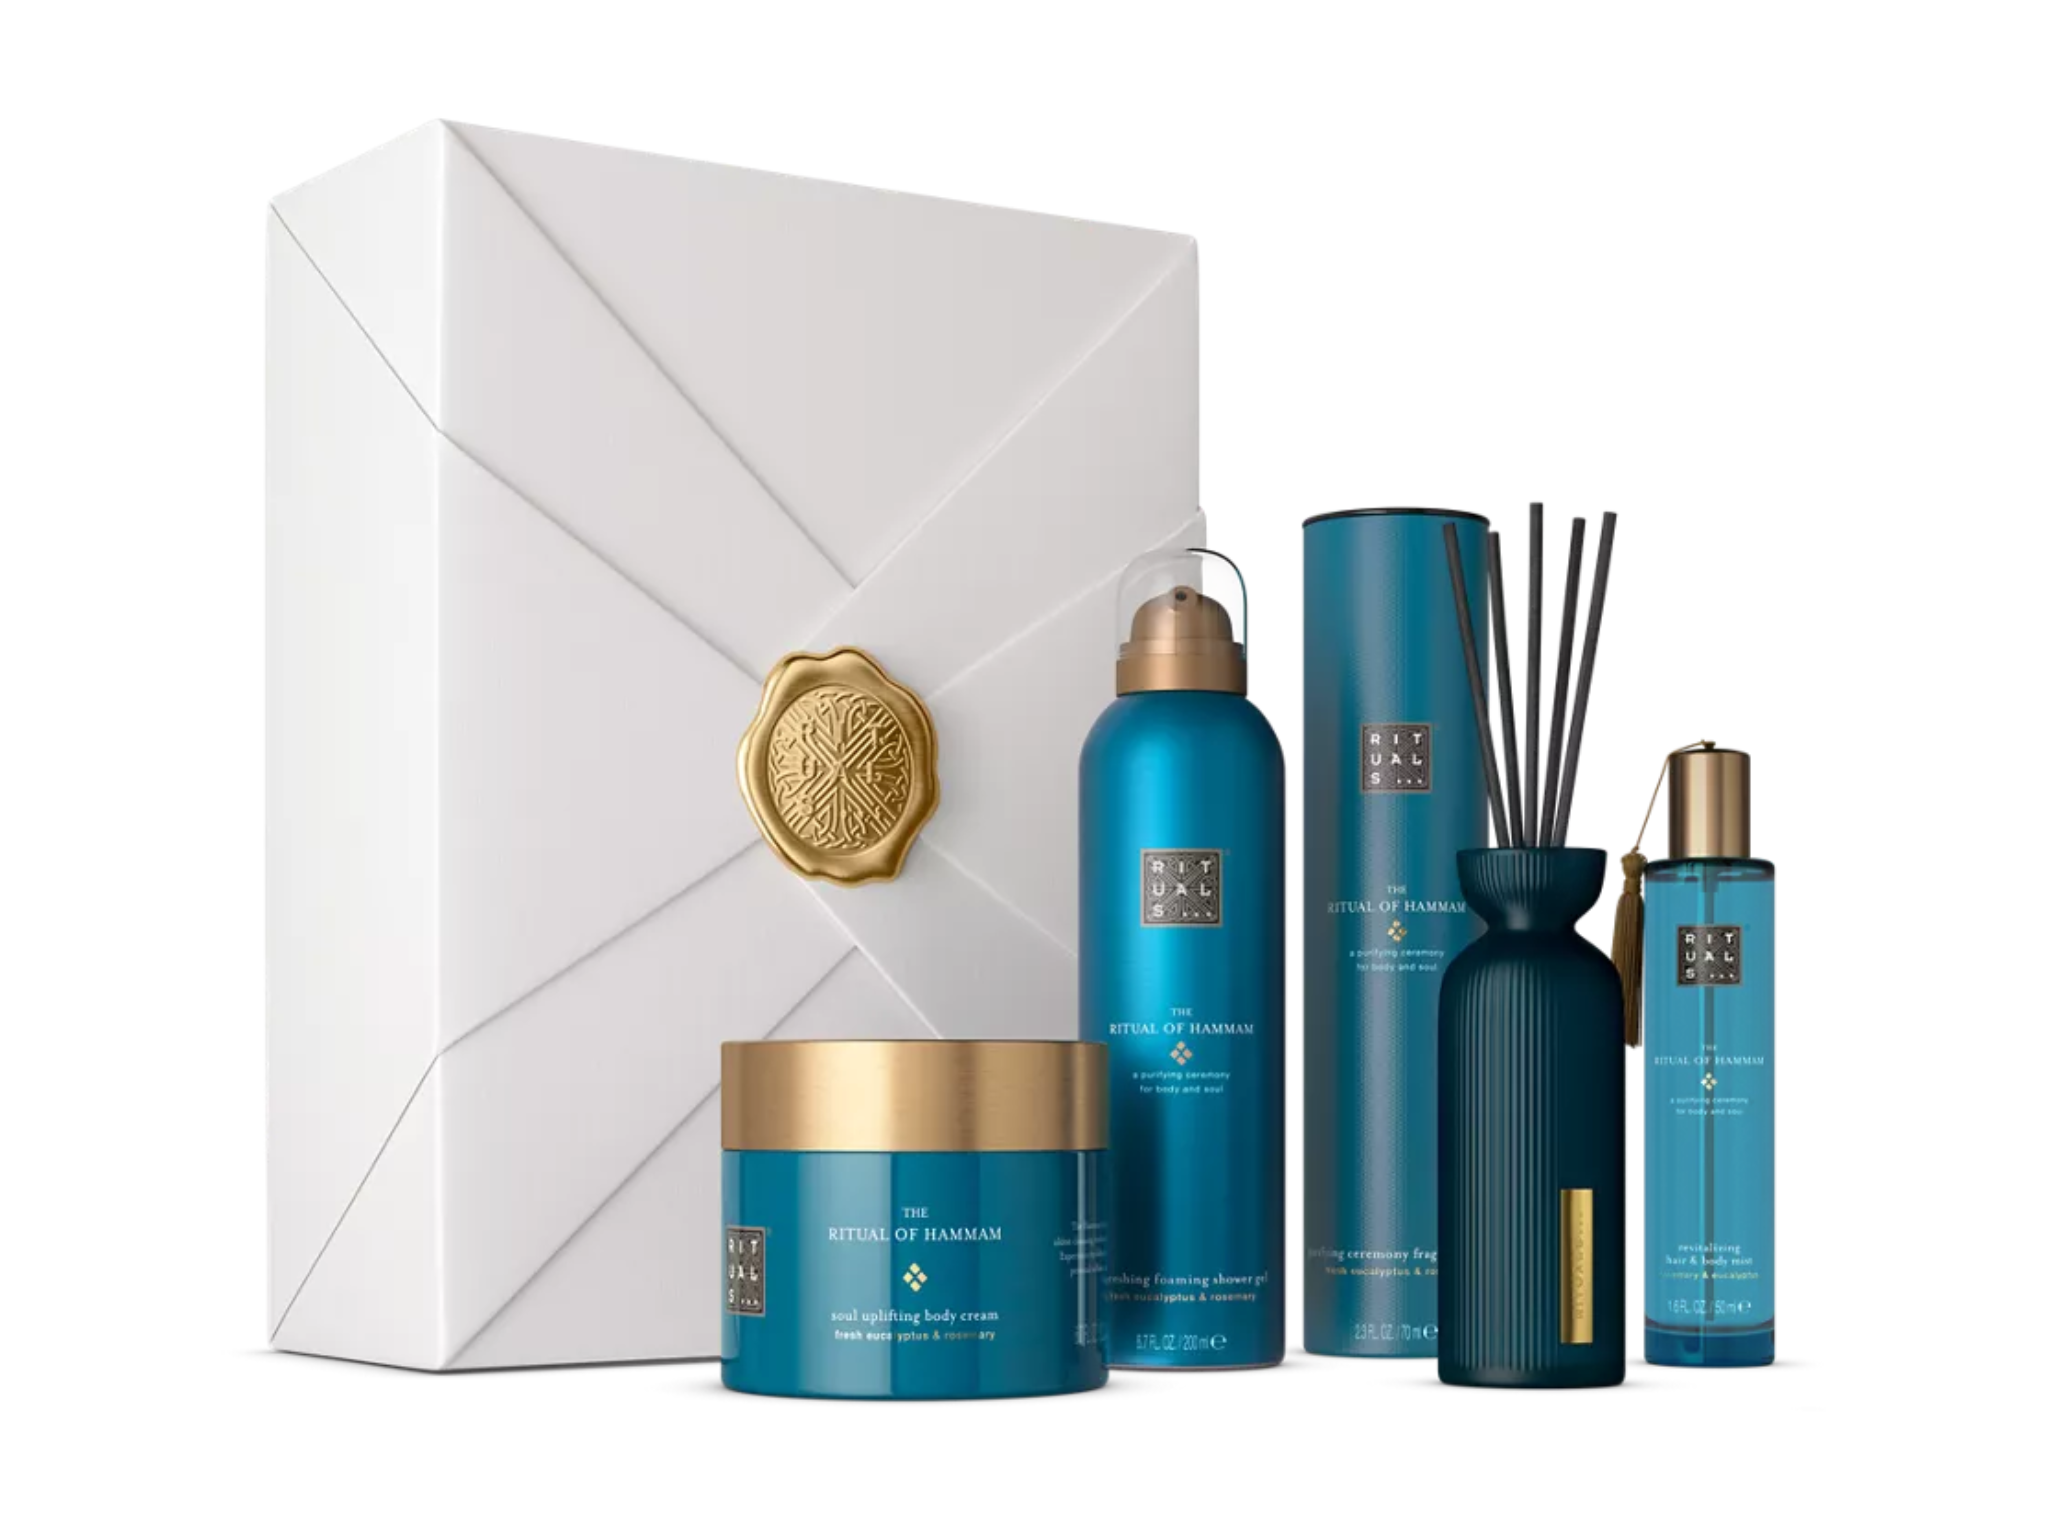 Rituals the ritual of hammam purifying collection